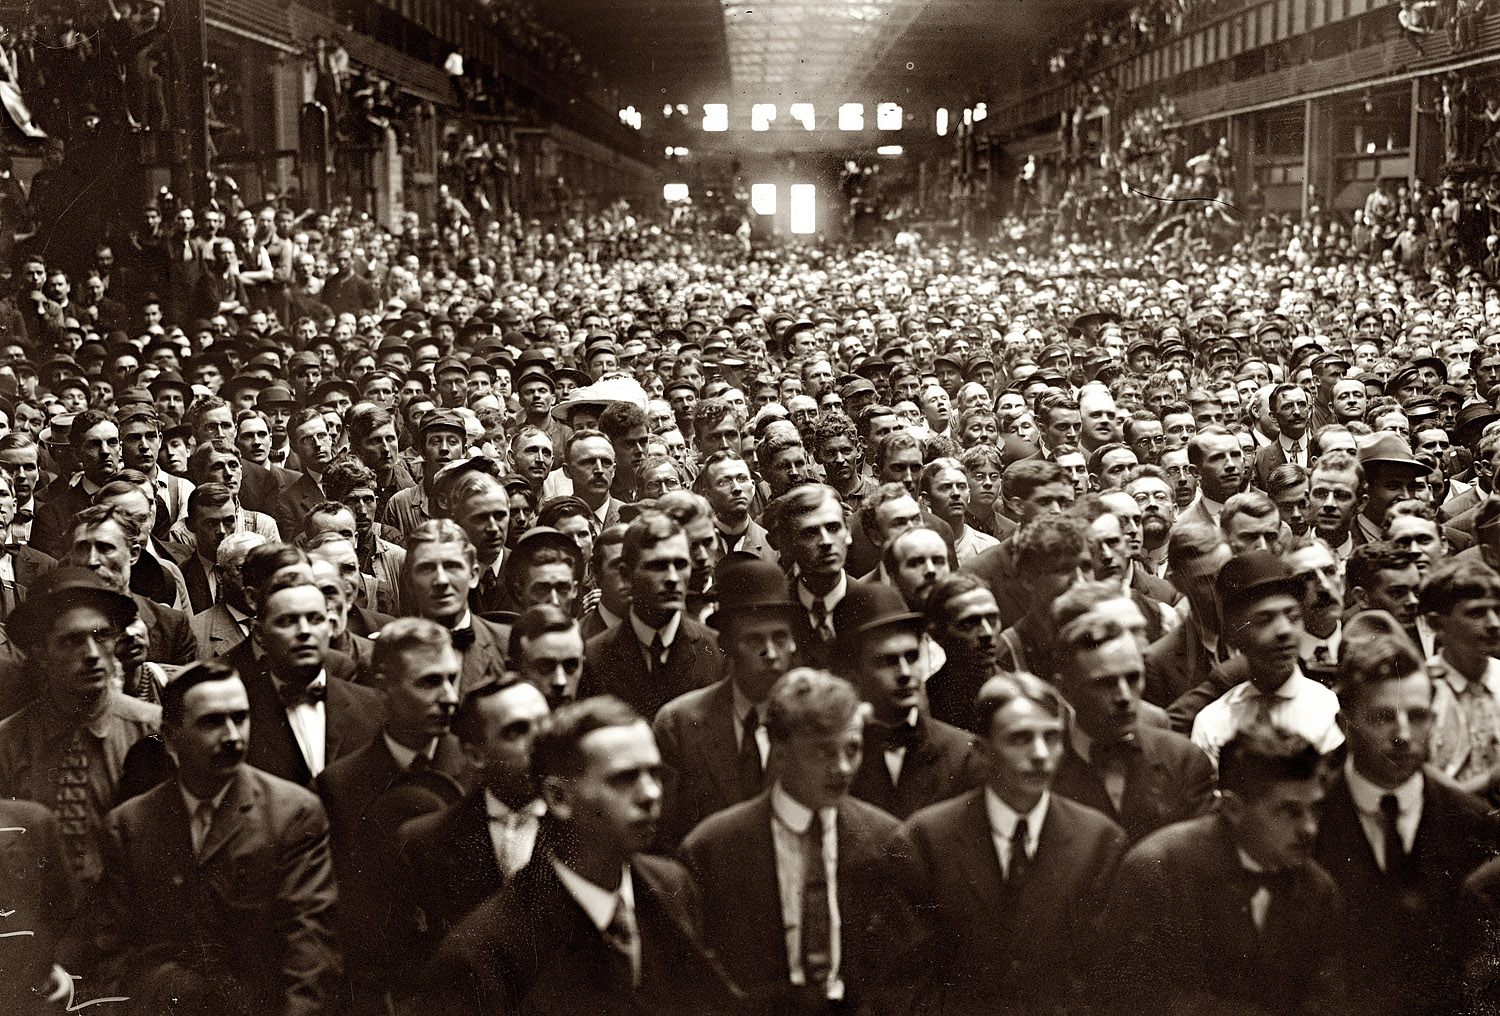 September 24, 1908. West Allis, Wisconsin. "Taft crowd at Allis-Chalmers works." Audience for William Taft, speaking from the platform of his train at the Allis- Chalmers yards. View full size. 5x7 glass negative, G.G. Bain Collection.